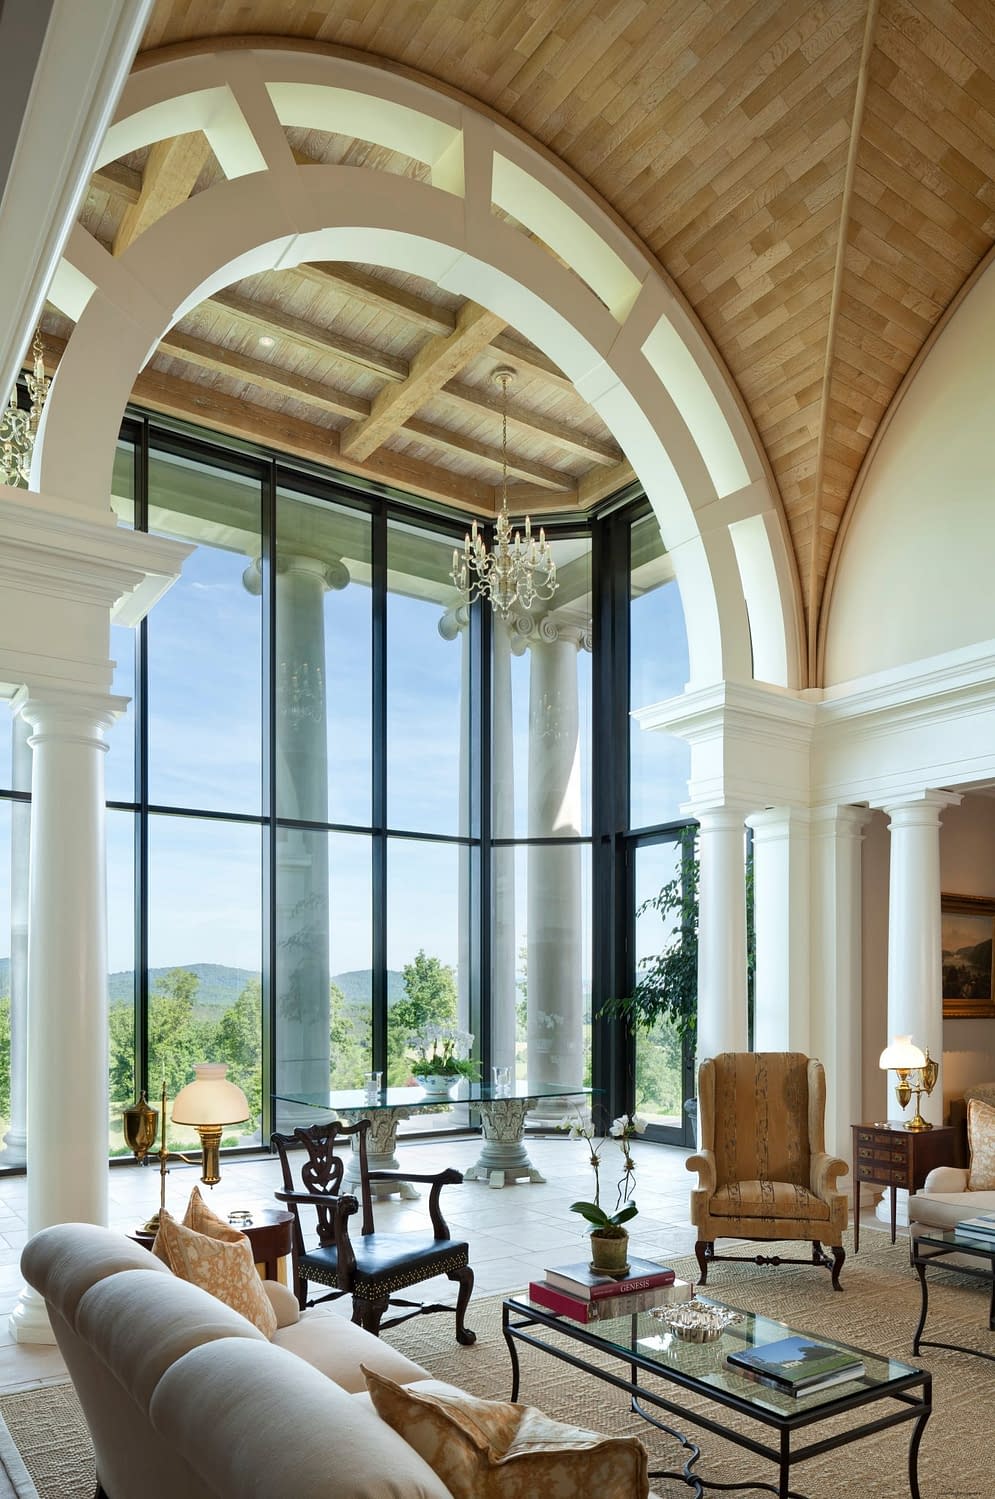 Thermally broken steel curtain wall window systems from Brombal conveys the splendor of this estate